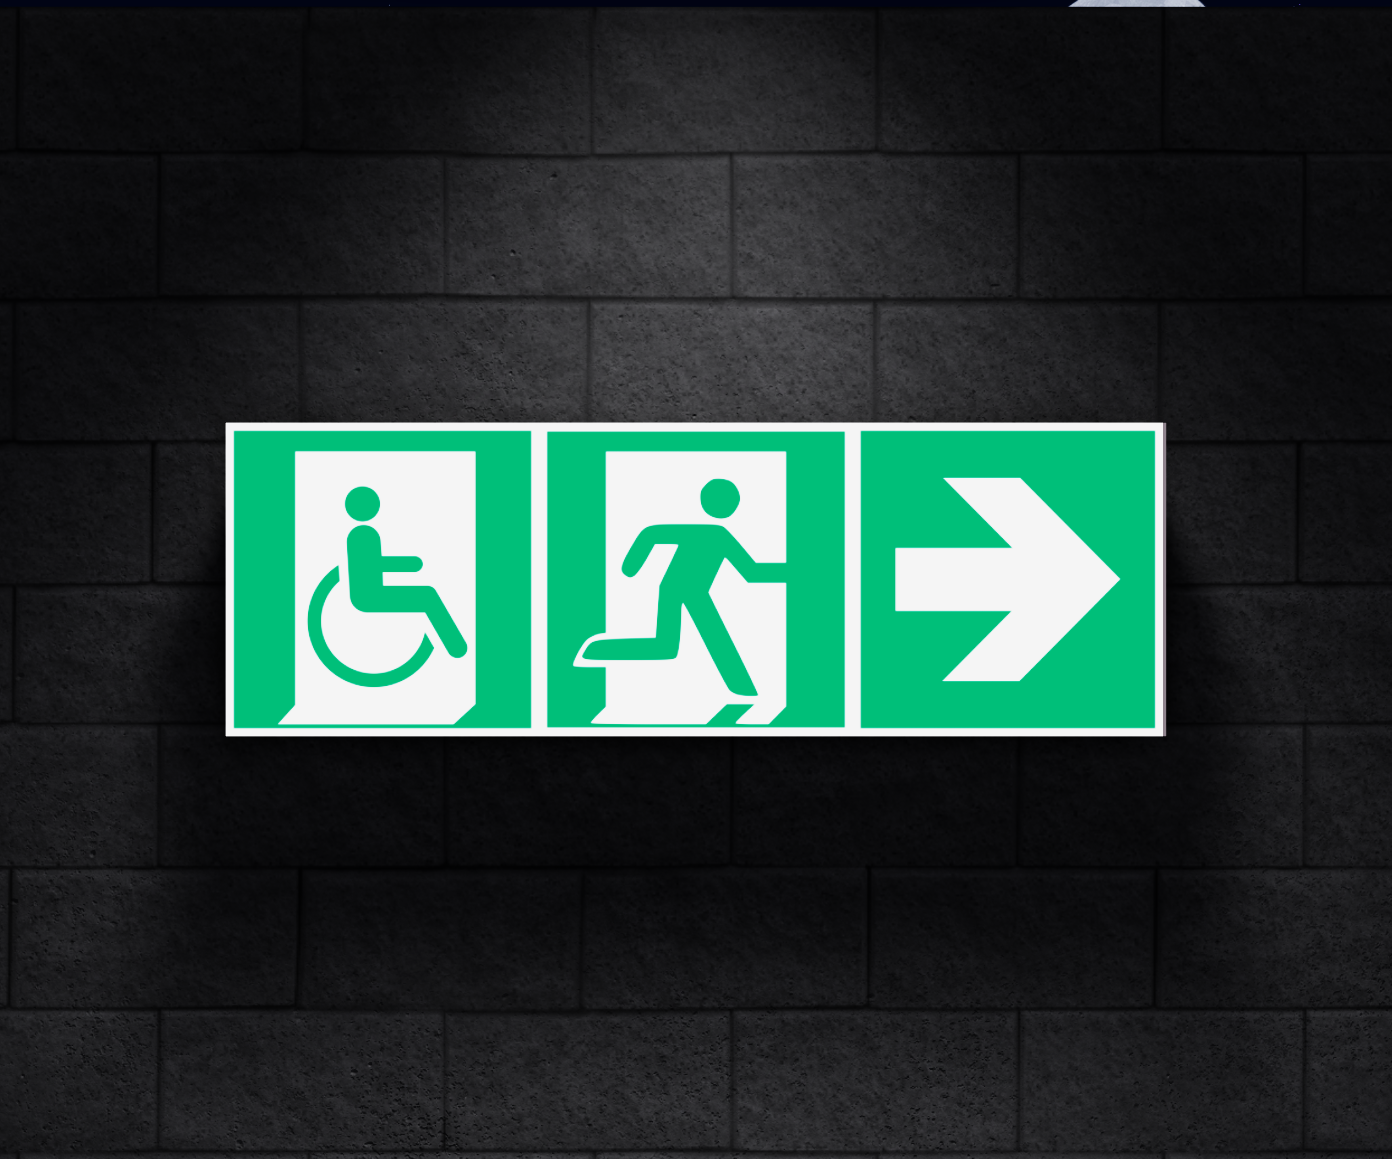 A green exit sign with 3 squares, the first depicts a person in a wheelchair exiting, the second a person running to the exit and the fourth is a leftwards arrow